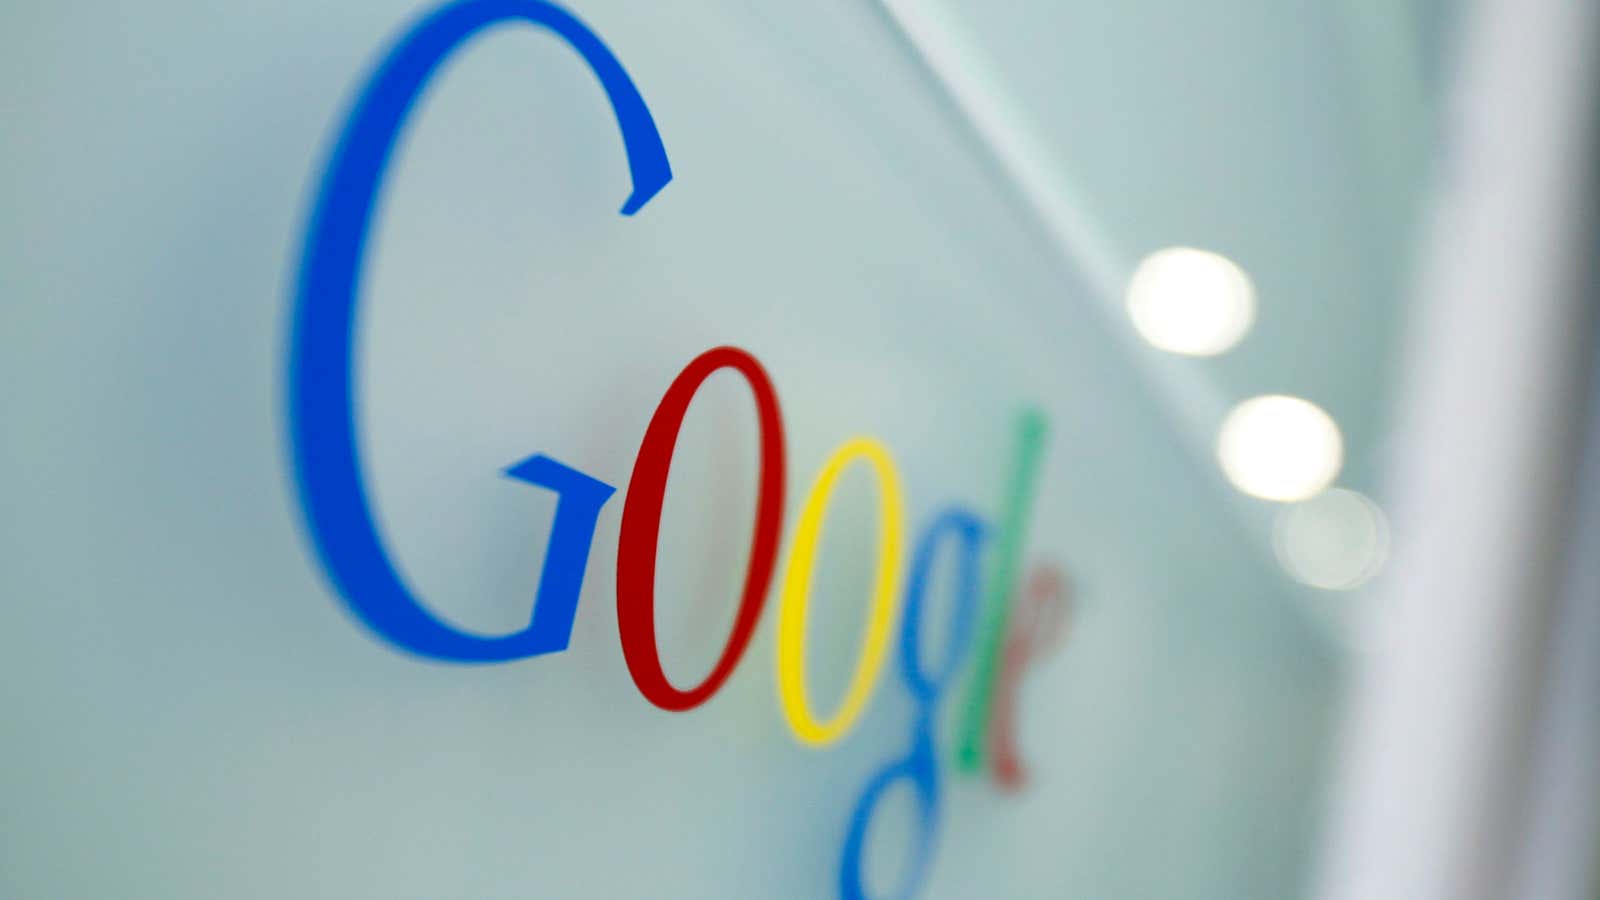 Google is getting into the credit-scoring industry.